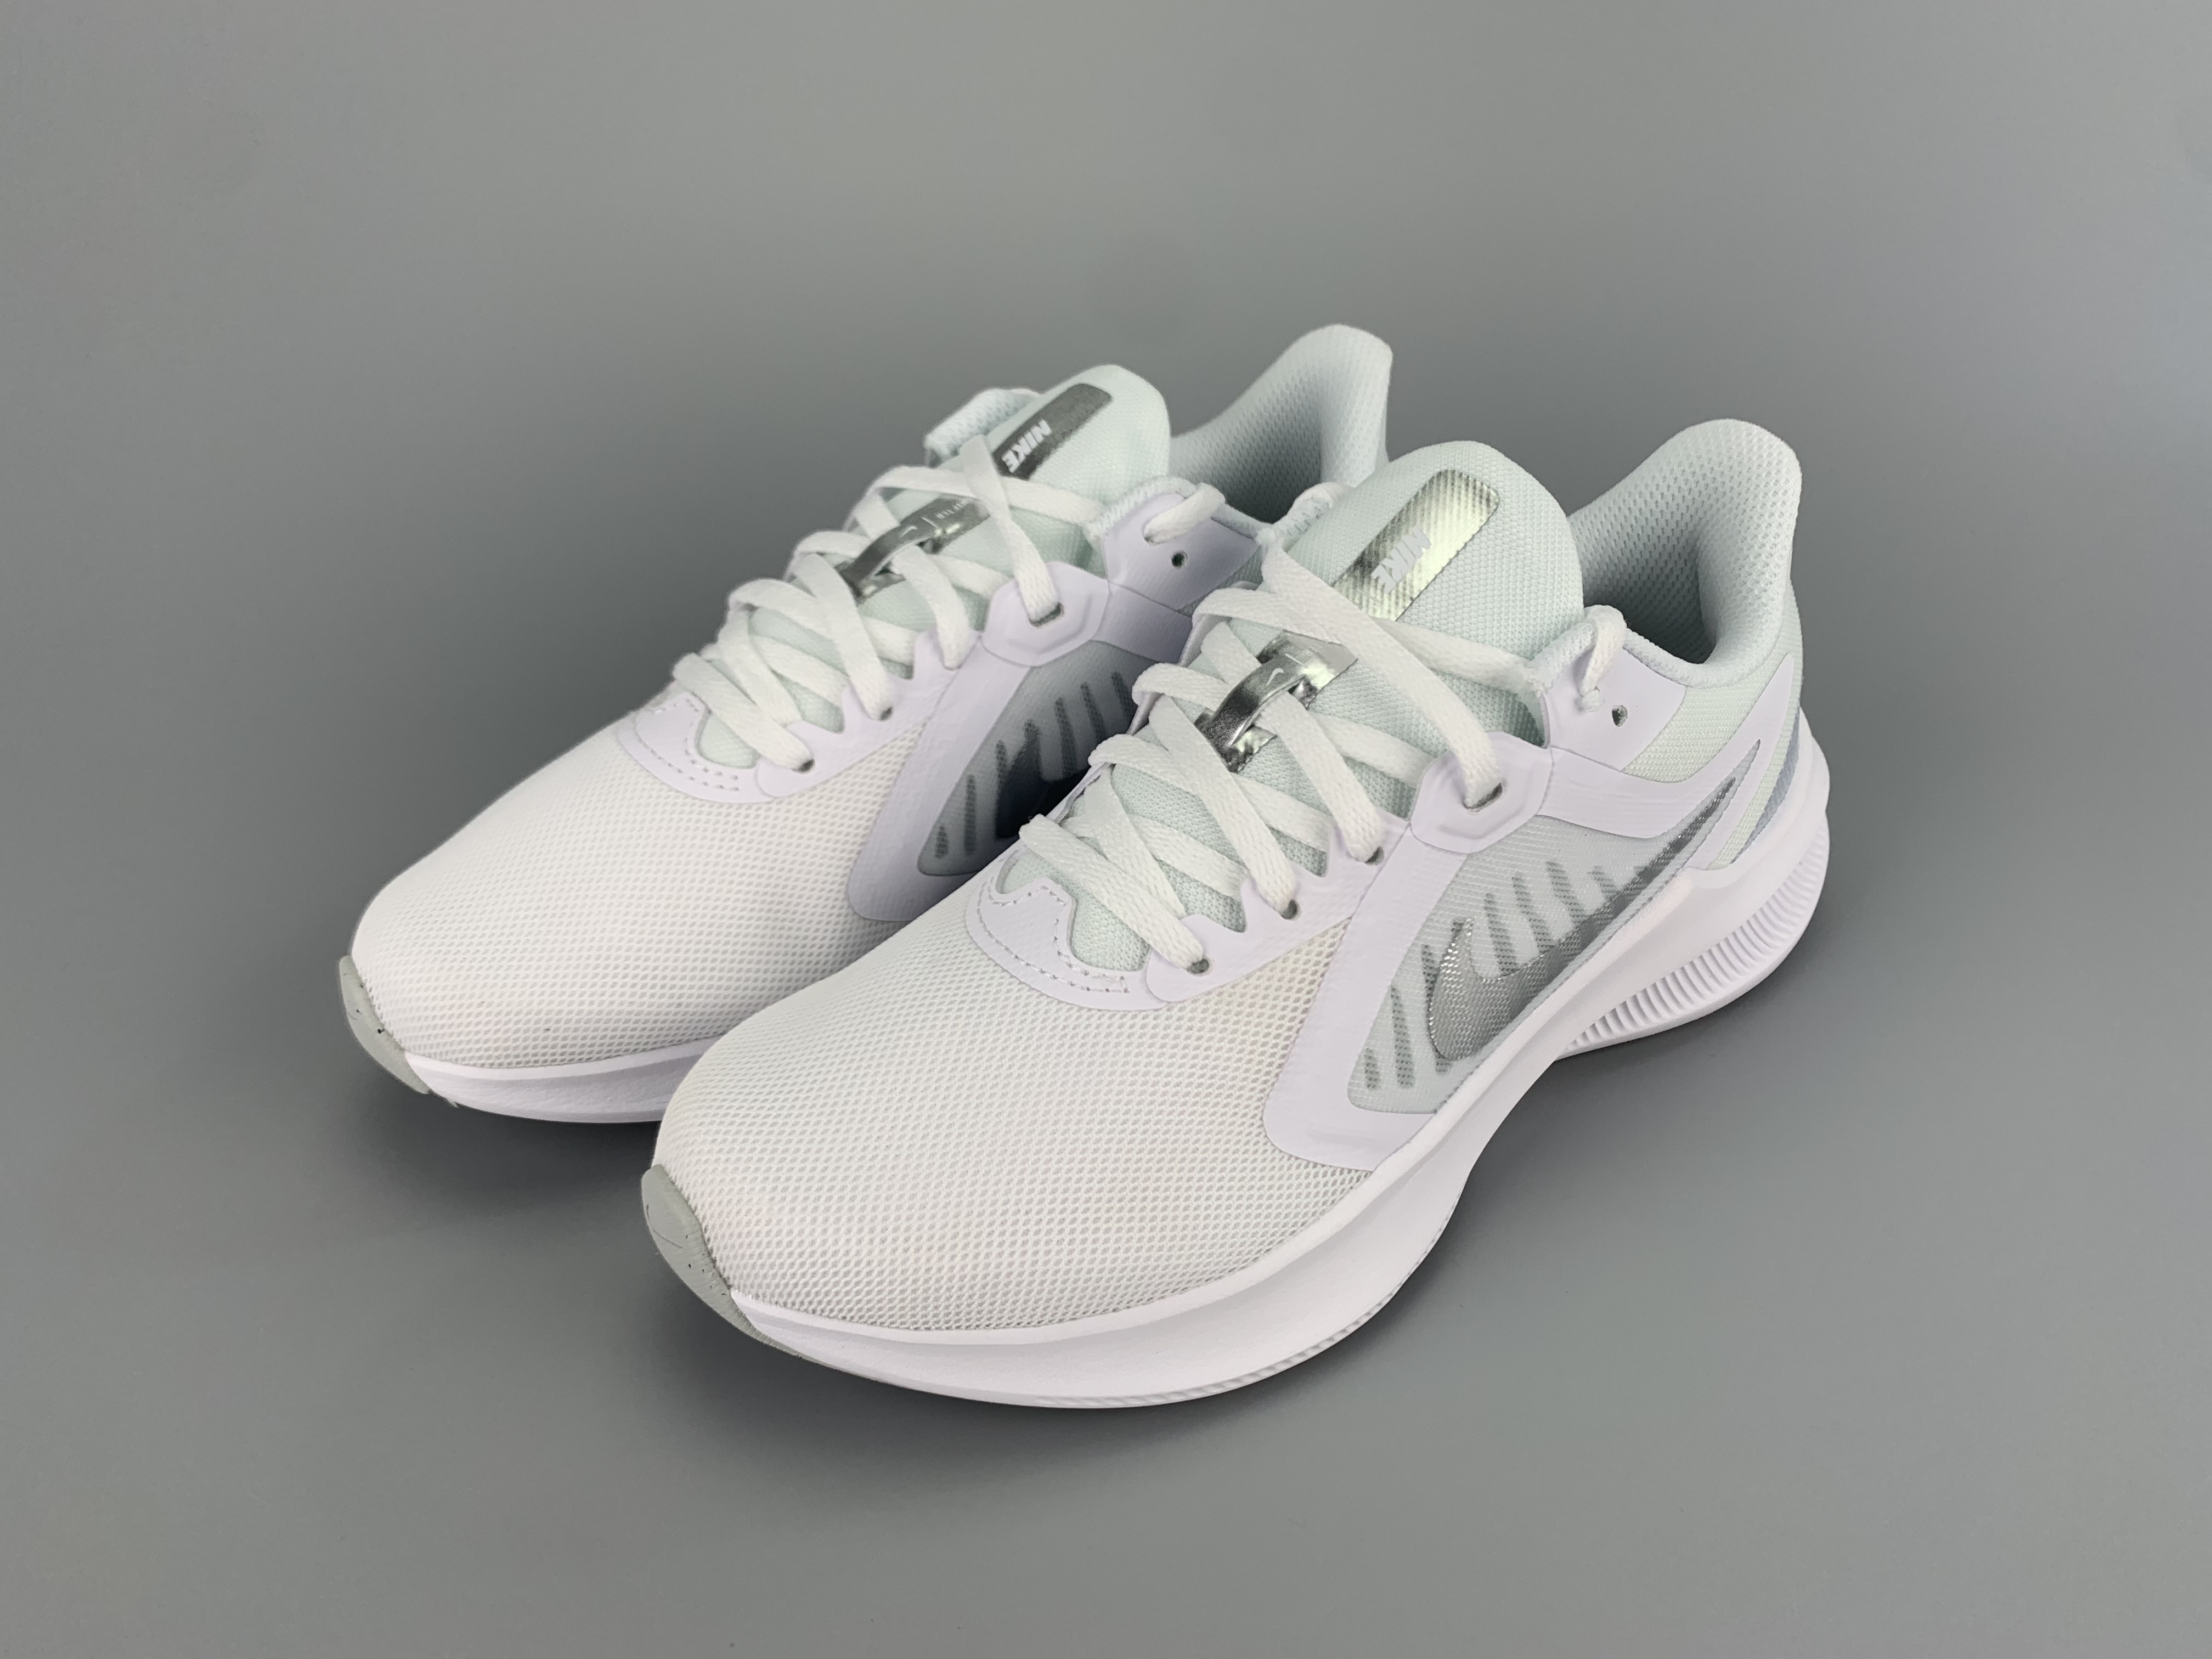 New Nike Air Zoom Pegasus 10 Grey Silver Running Shoes For Women